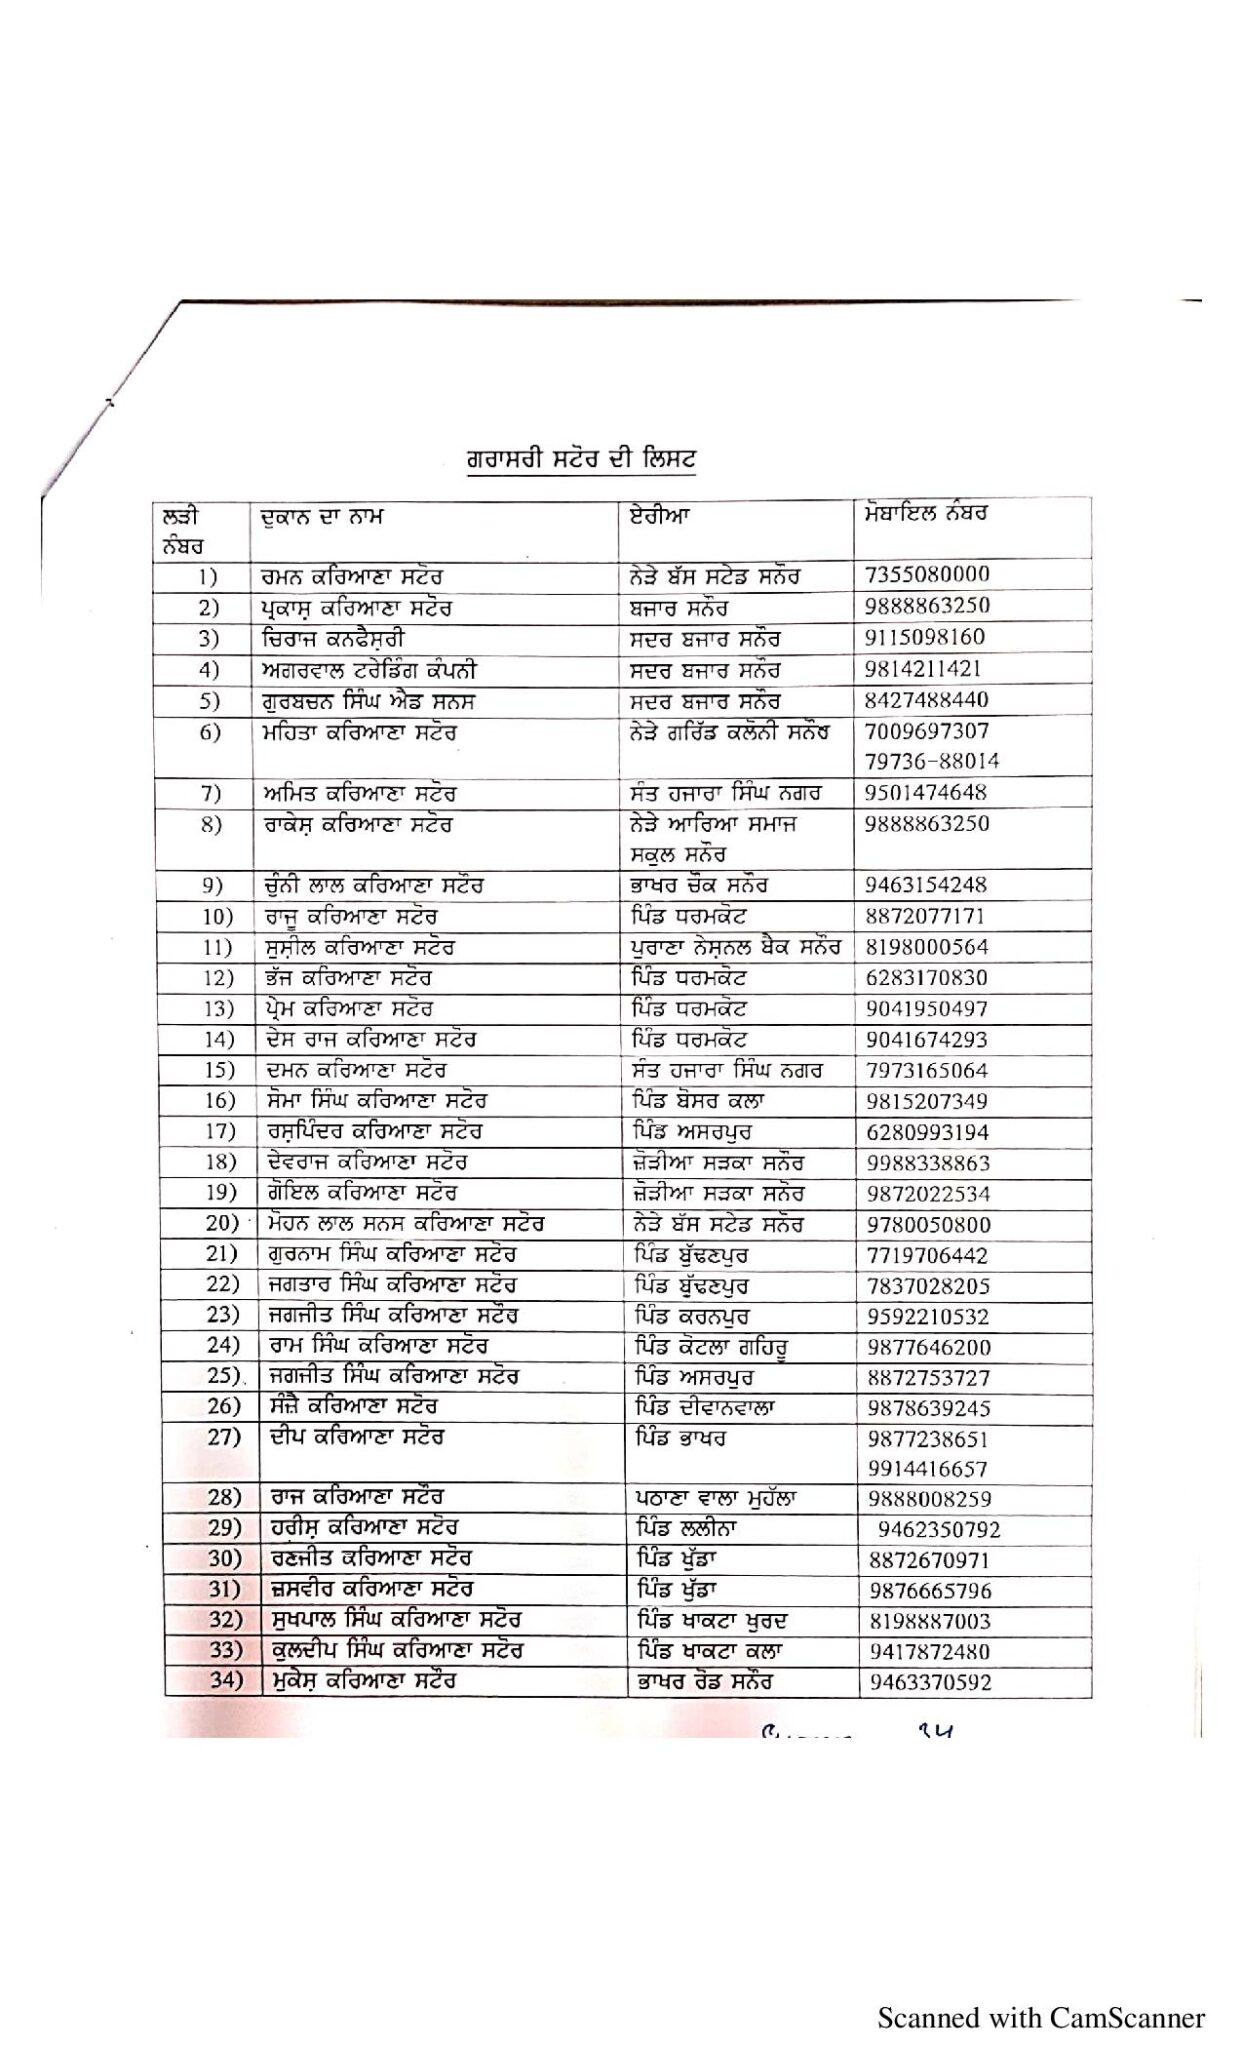 Sanuor (Patiala) vendors list released by Patiala administration